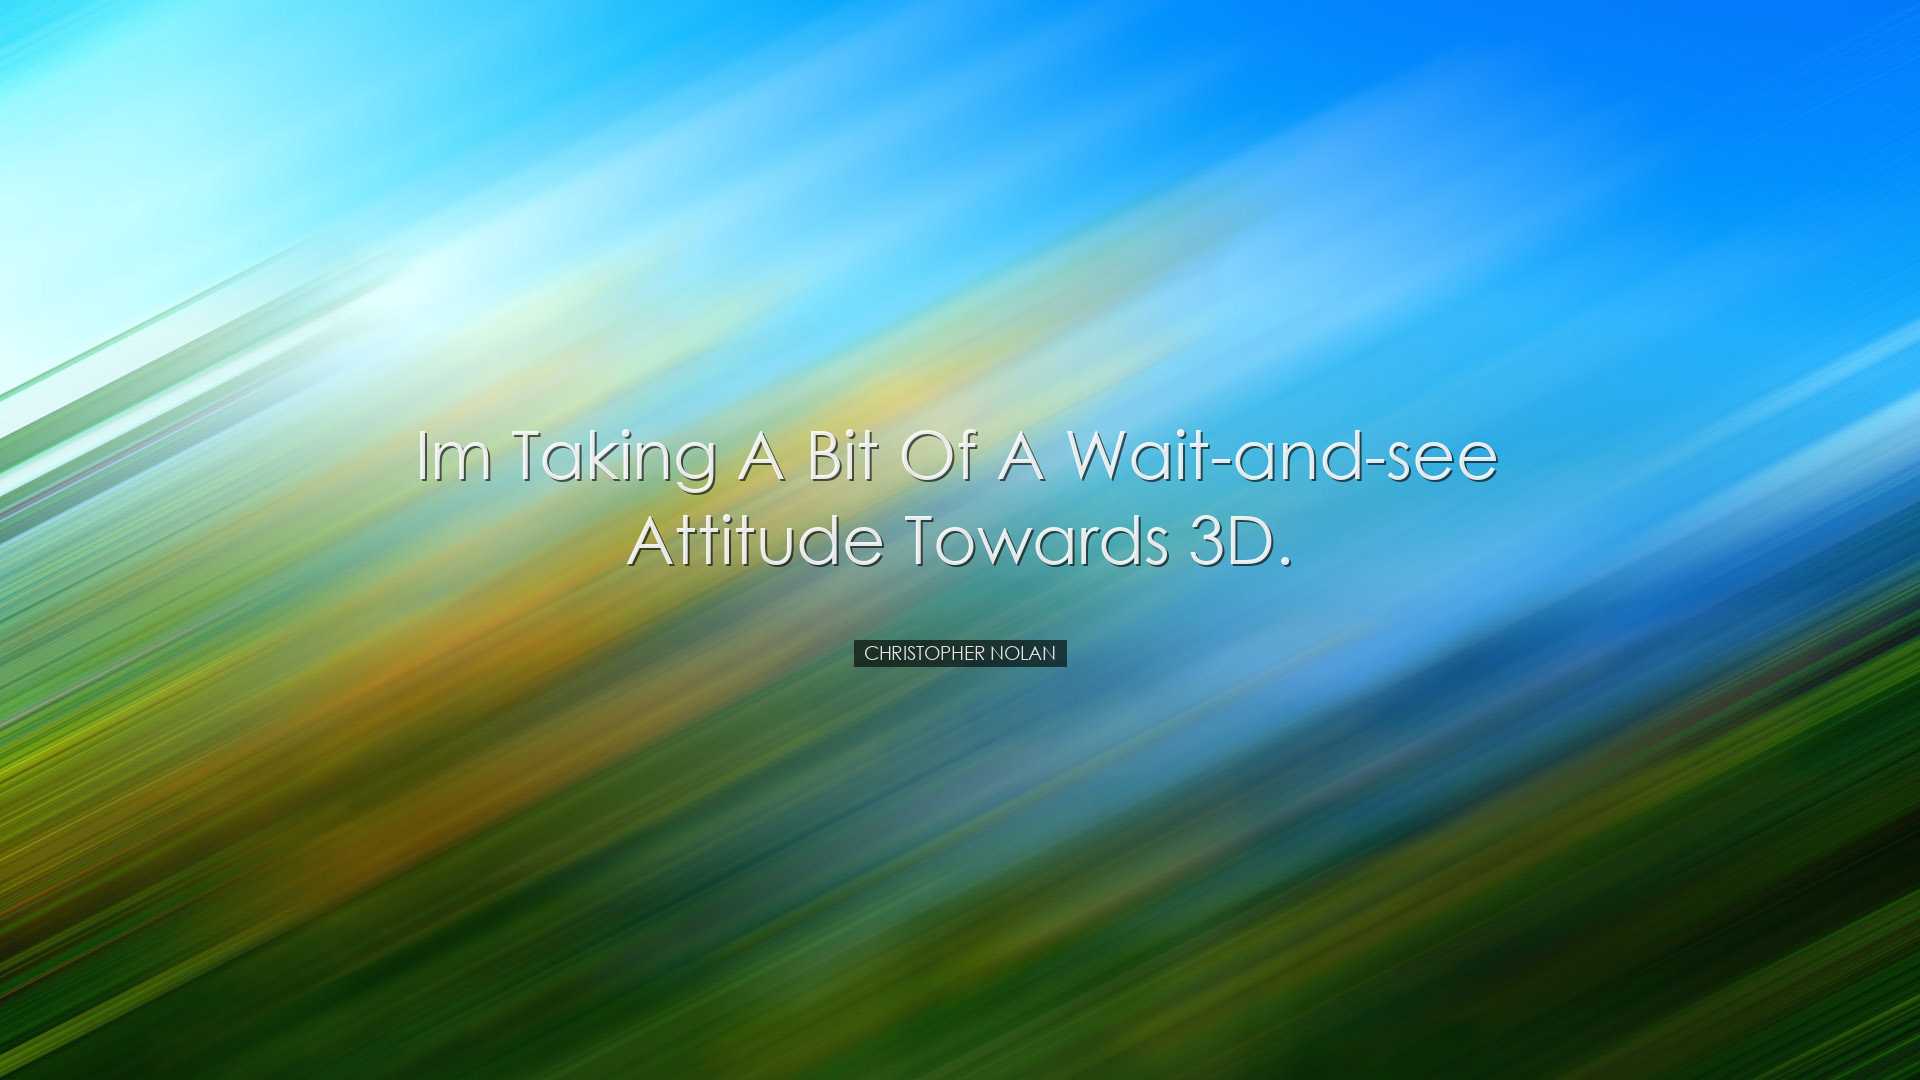 Im taking a bit of a wait-and-see attitude towards 3D. - Christoph